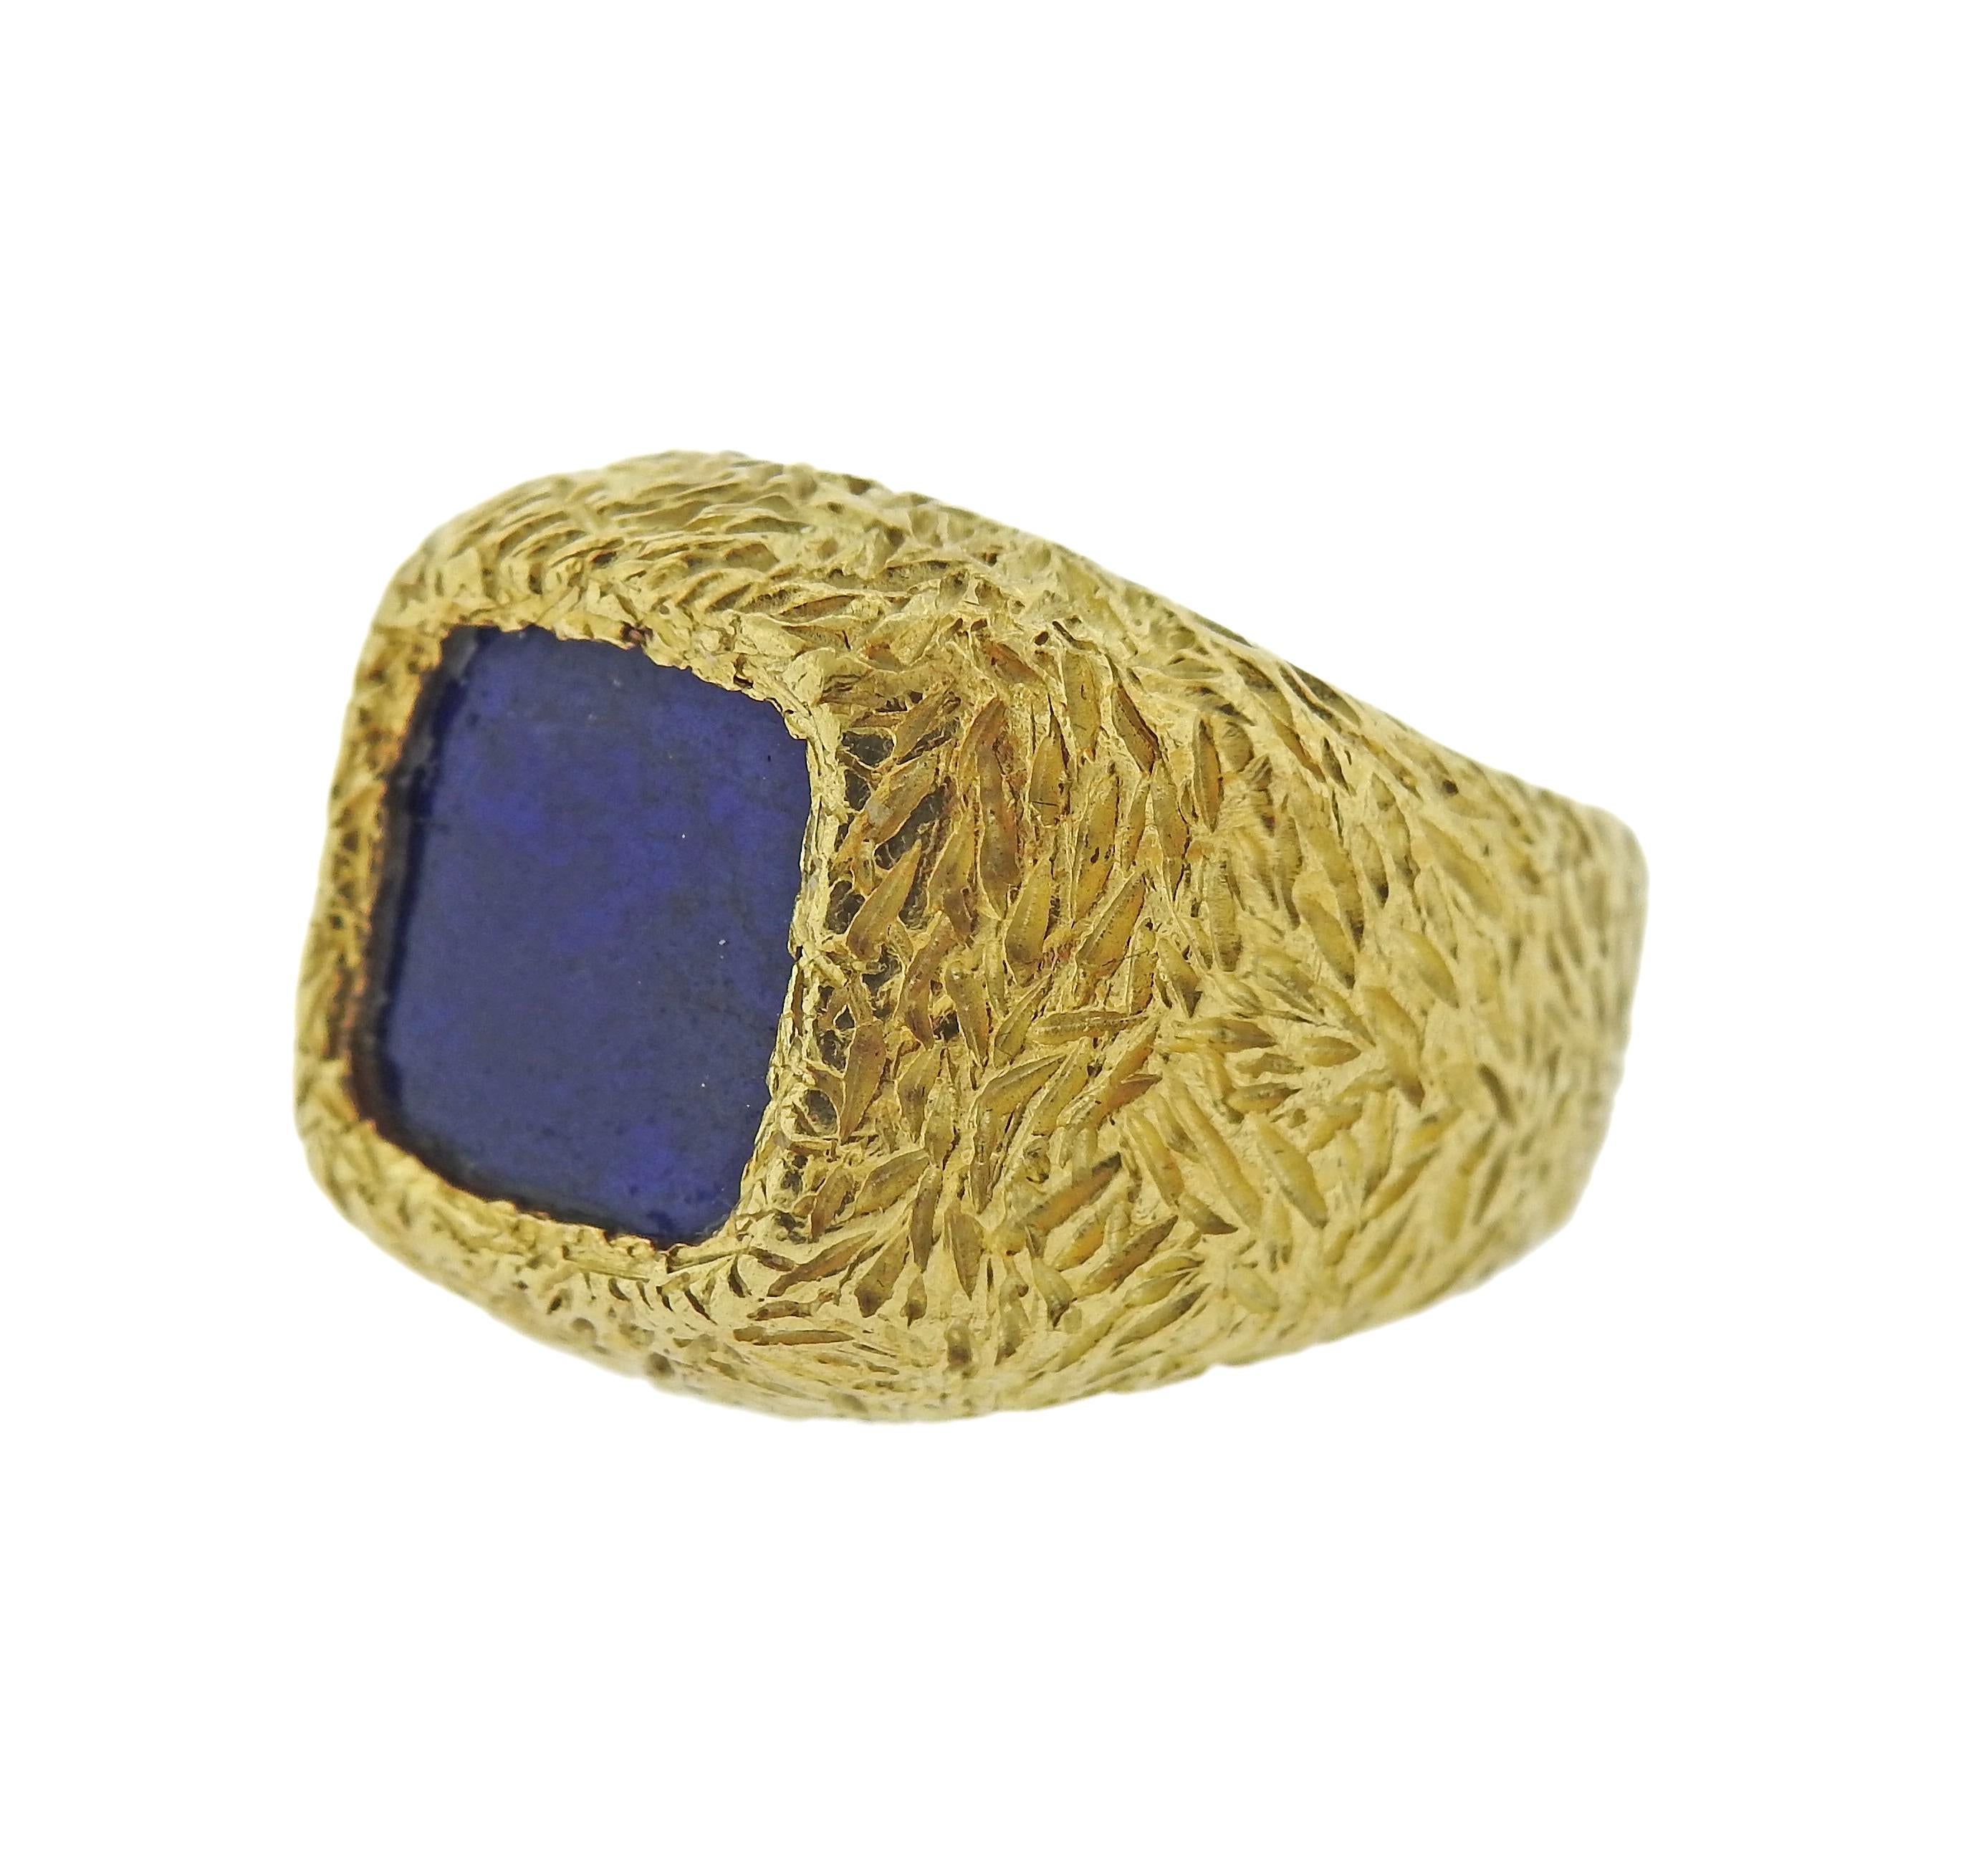 1970s vintage, 18k textured finish gold ring, with lapis lazuli. Ring size - 7.5, ring top - 18mm wide. Weight - 19.8 grams.